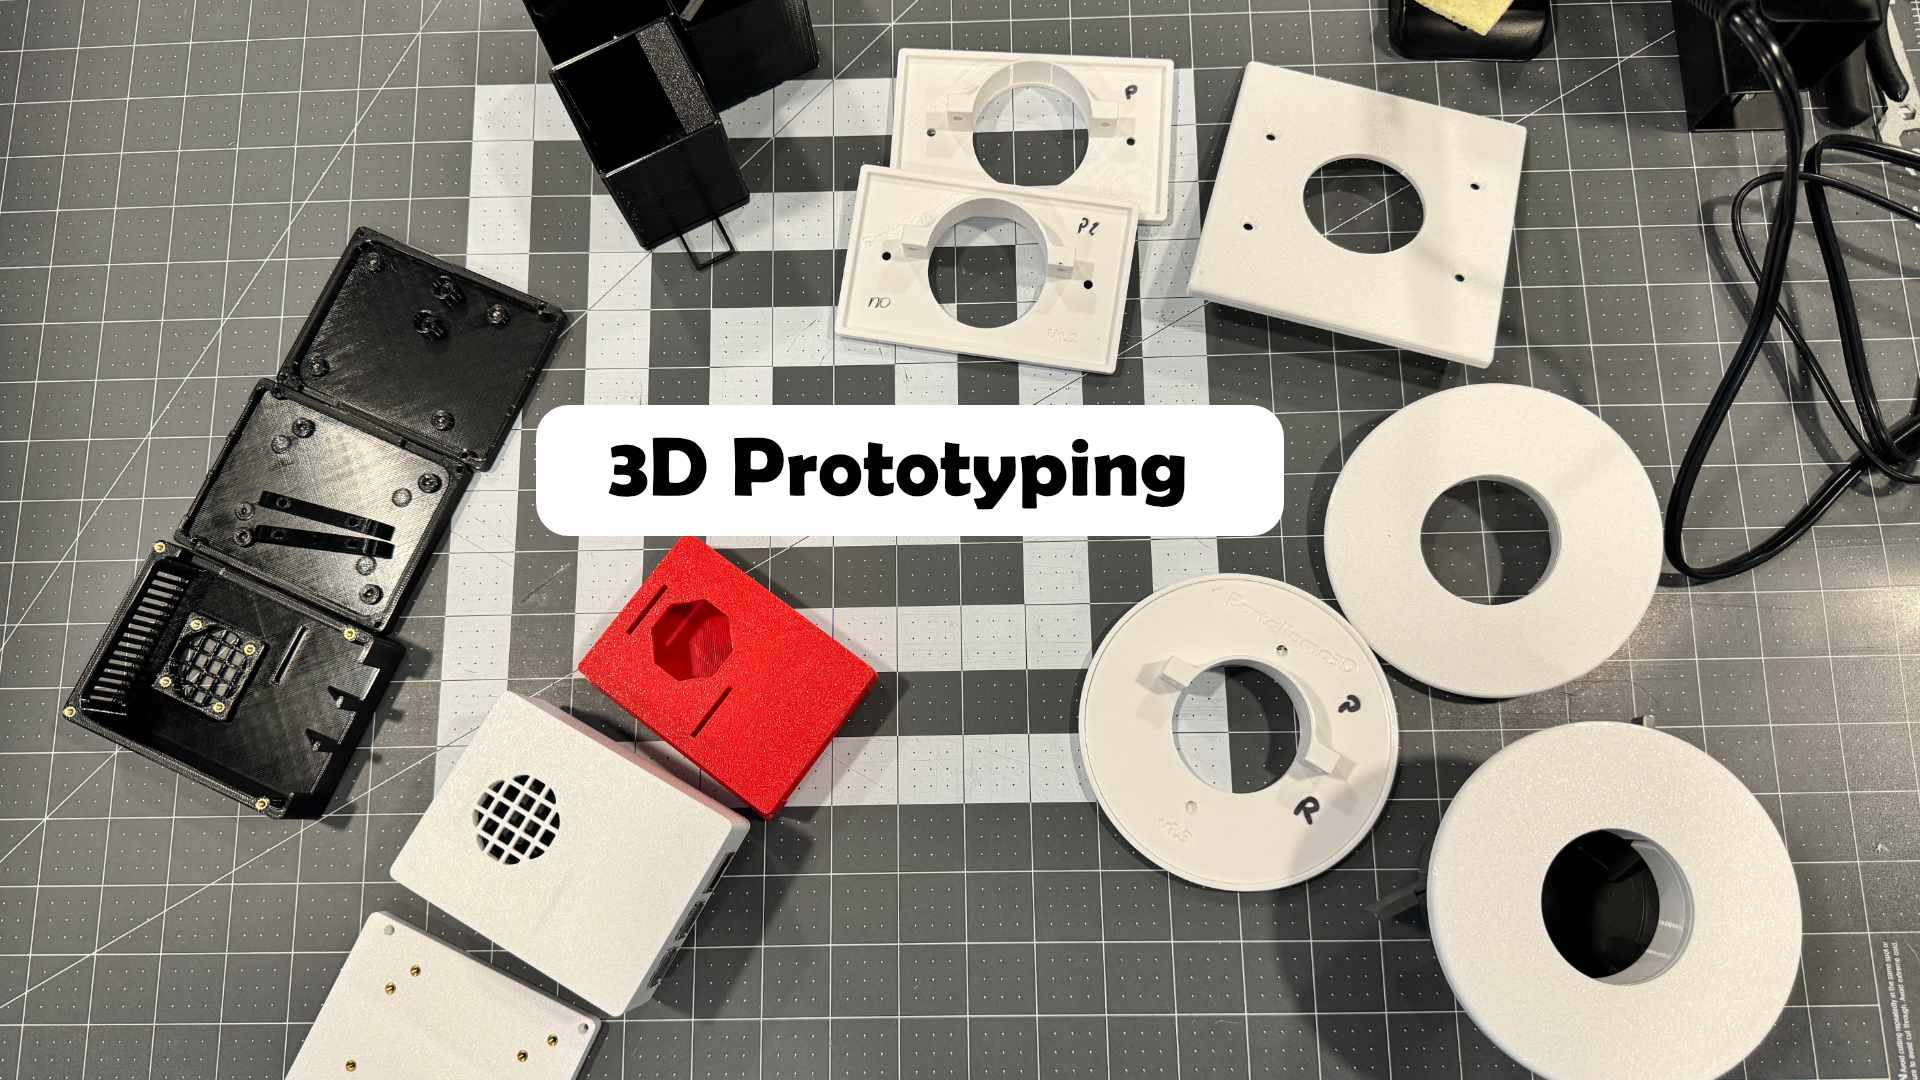 a photo of a desk containing various 3D printed prototypes like covers, cases and containers showcasing our prototyping services